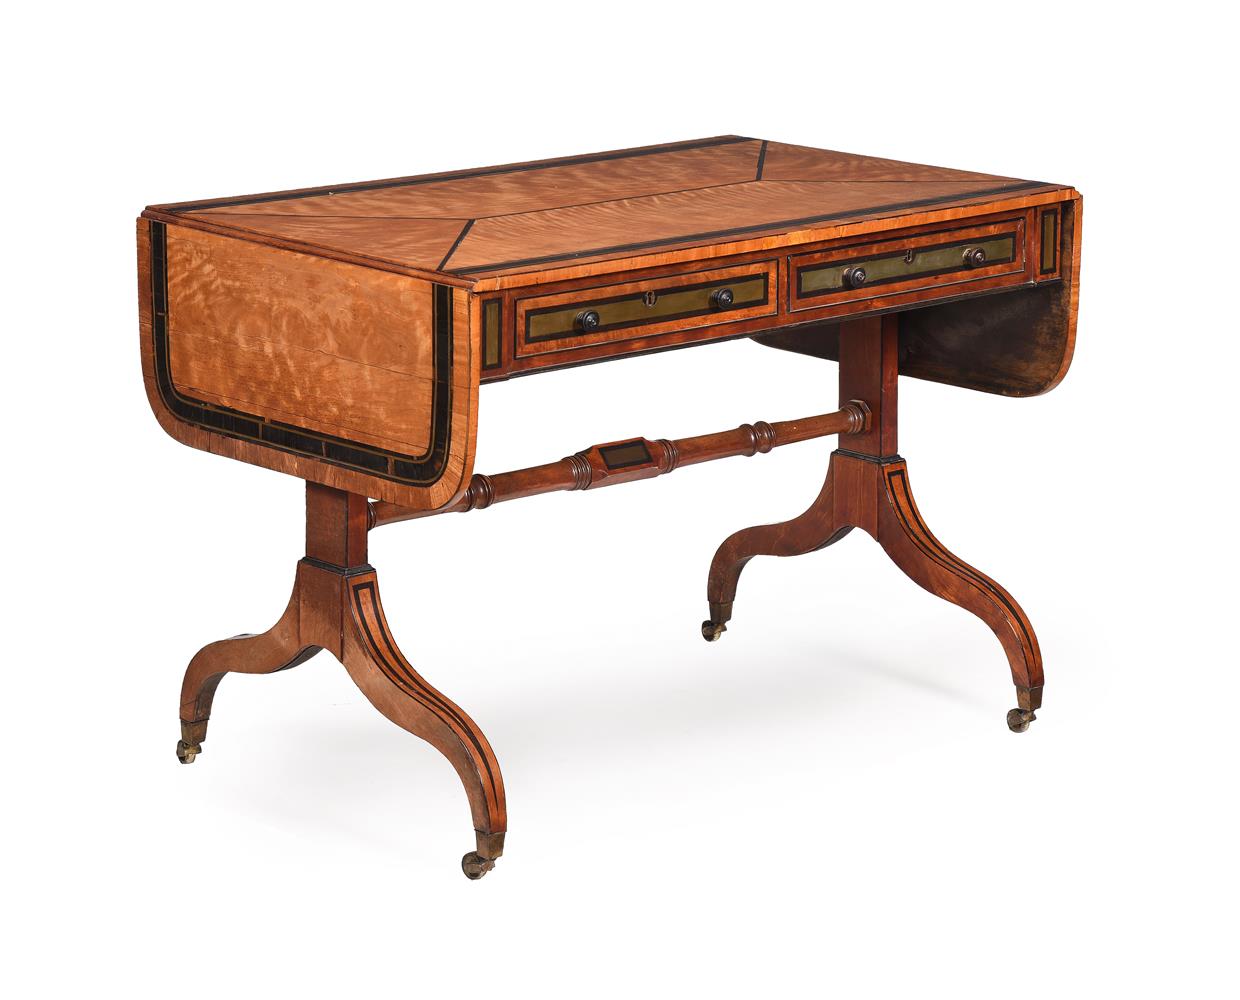 Y A REGENCY SATINWOOD, EBONY AND BRASS INLAID SOFA TABLE, CIRCA 1815 - Image 2 of 7